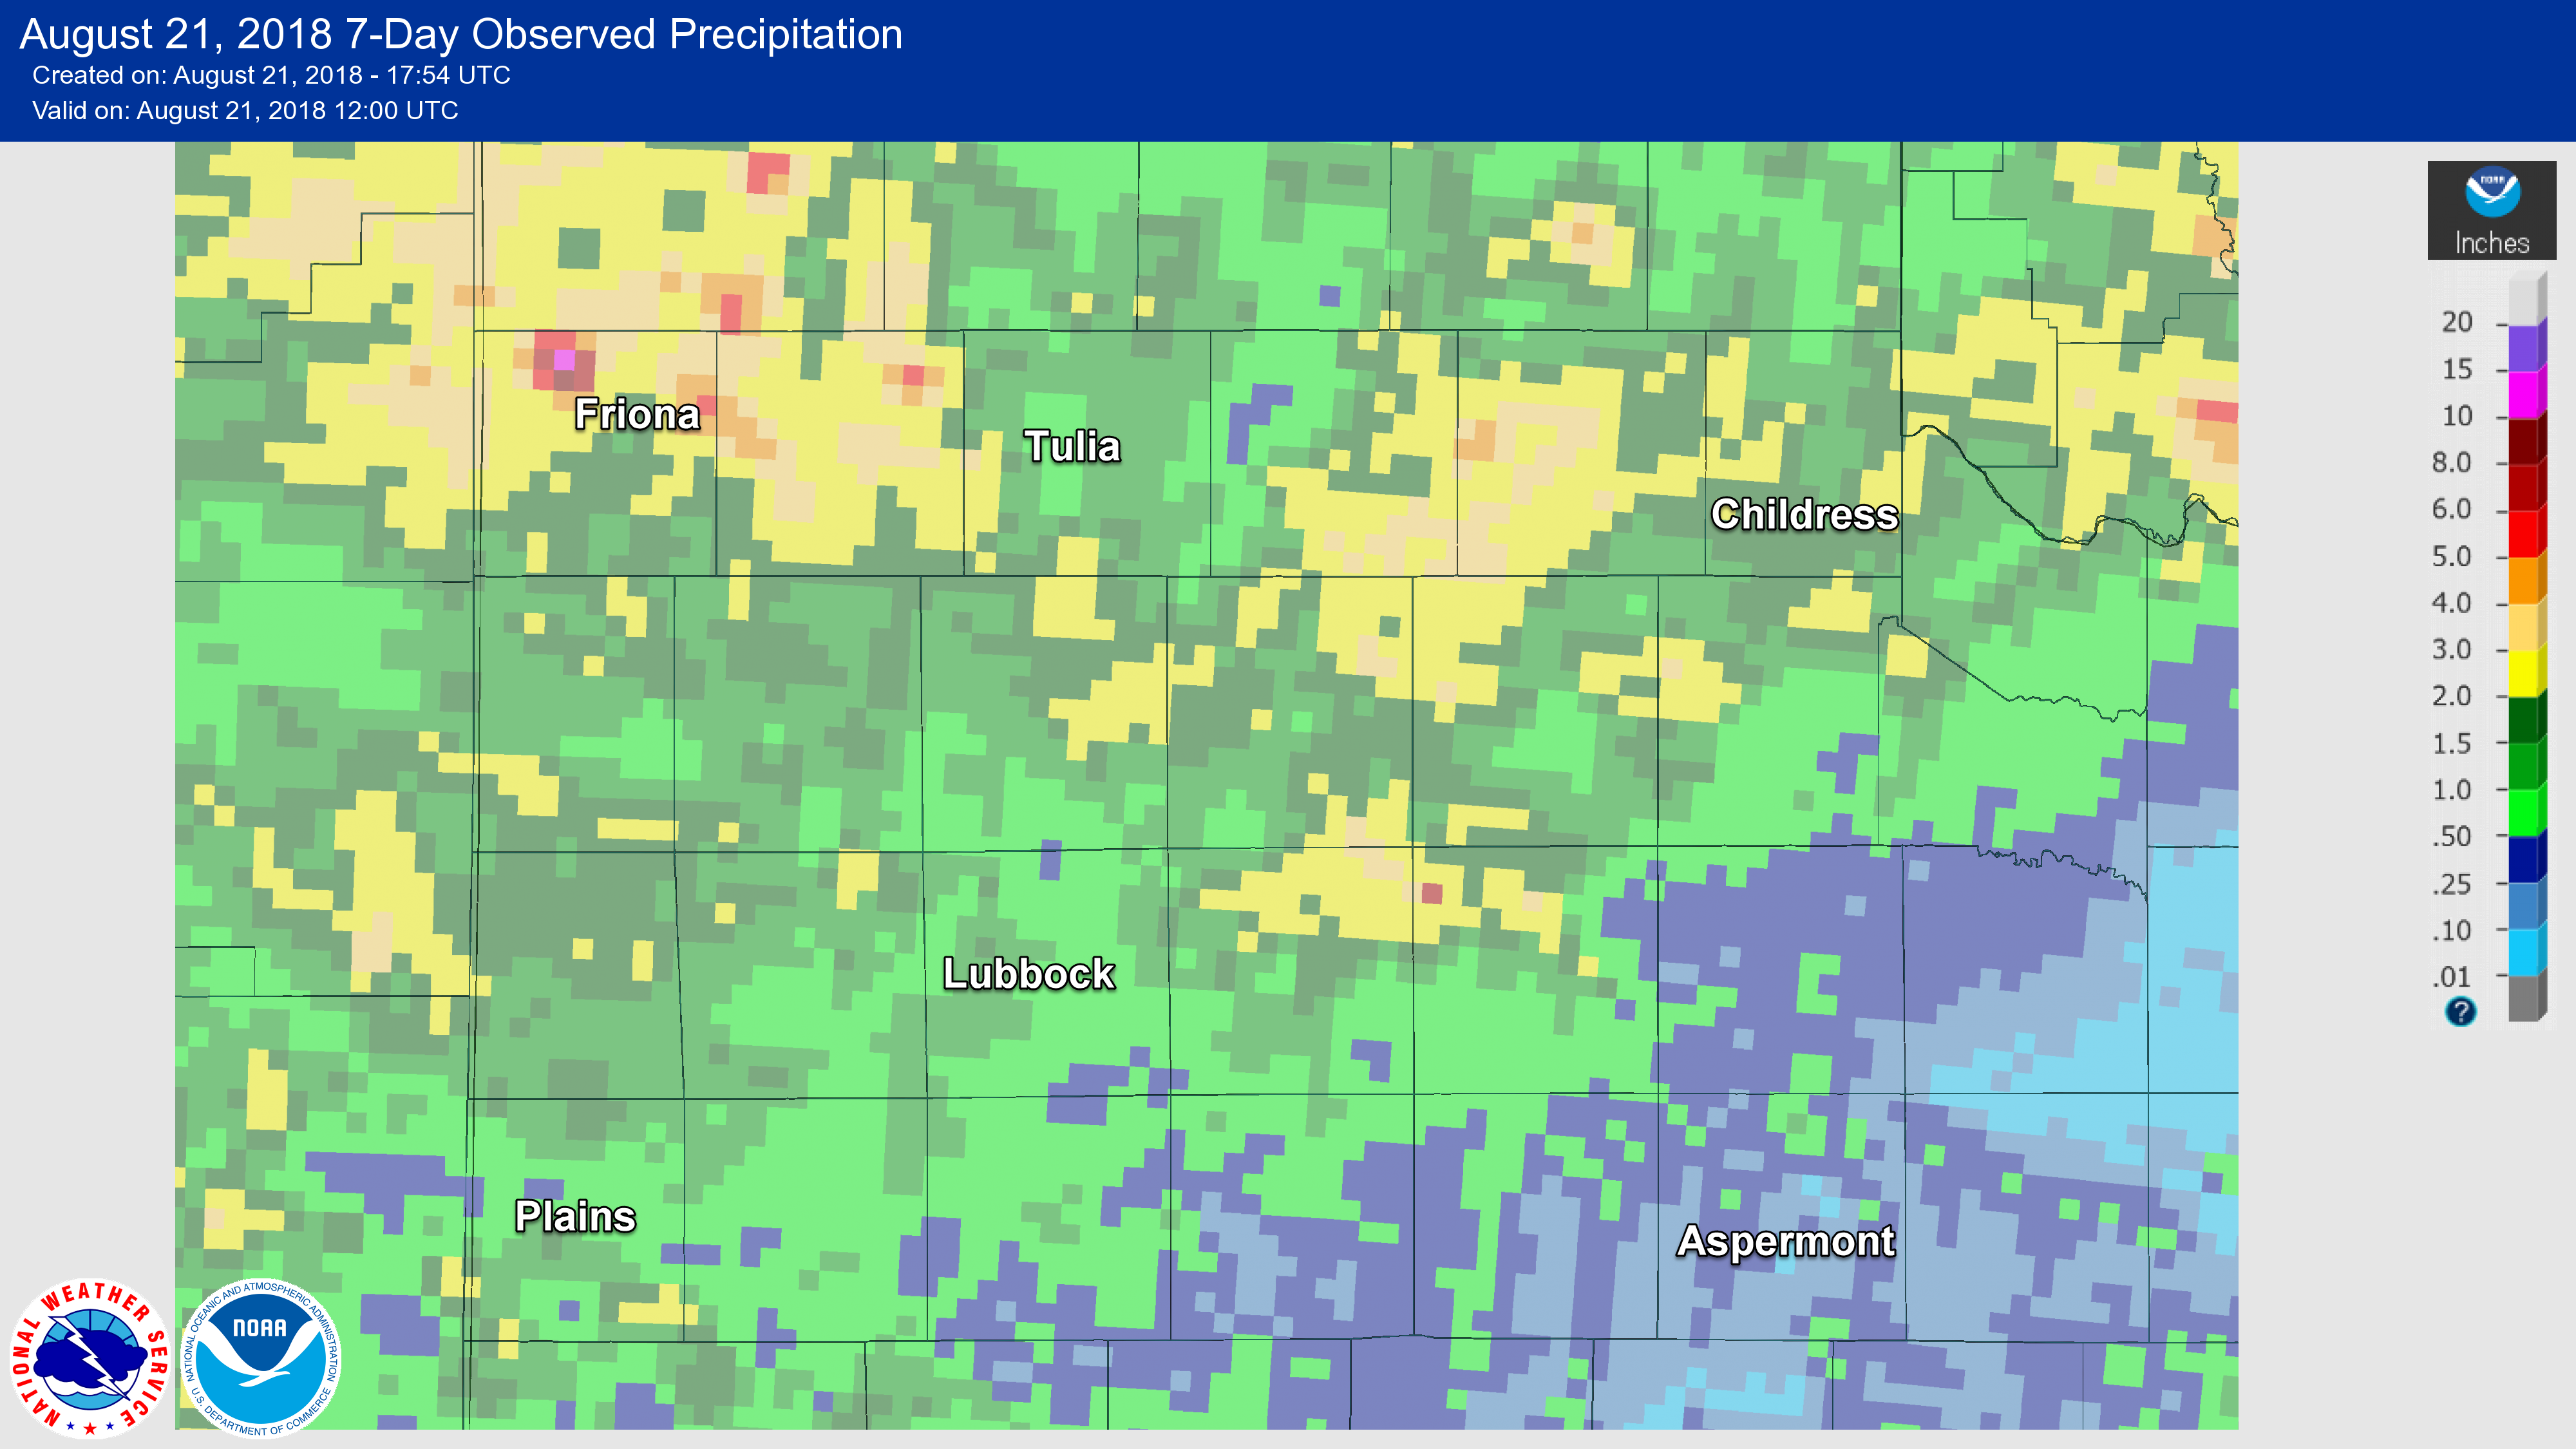 Radar-estimated and bias-corrected 7-day rainfall ending at 7 am on Tuesday, 21 August 2018.